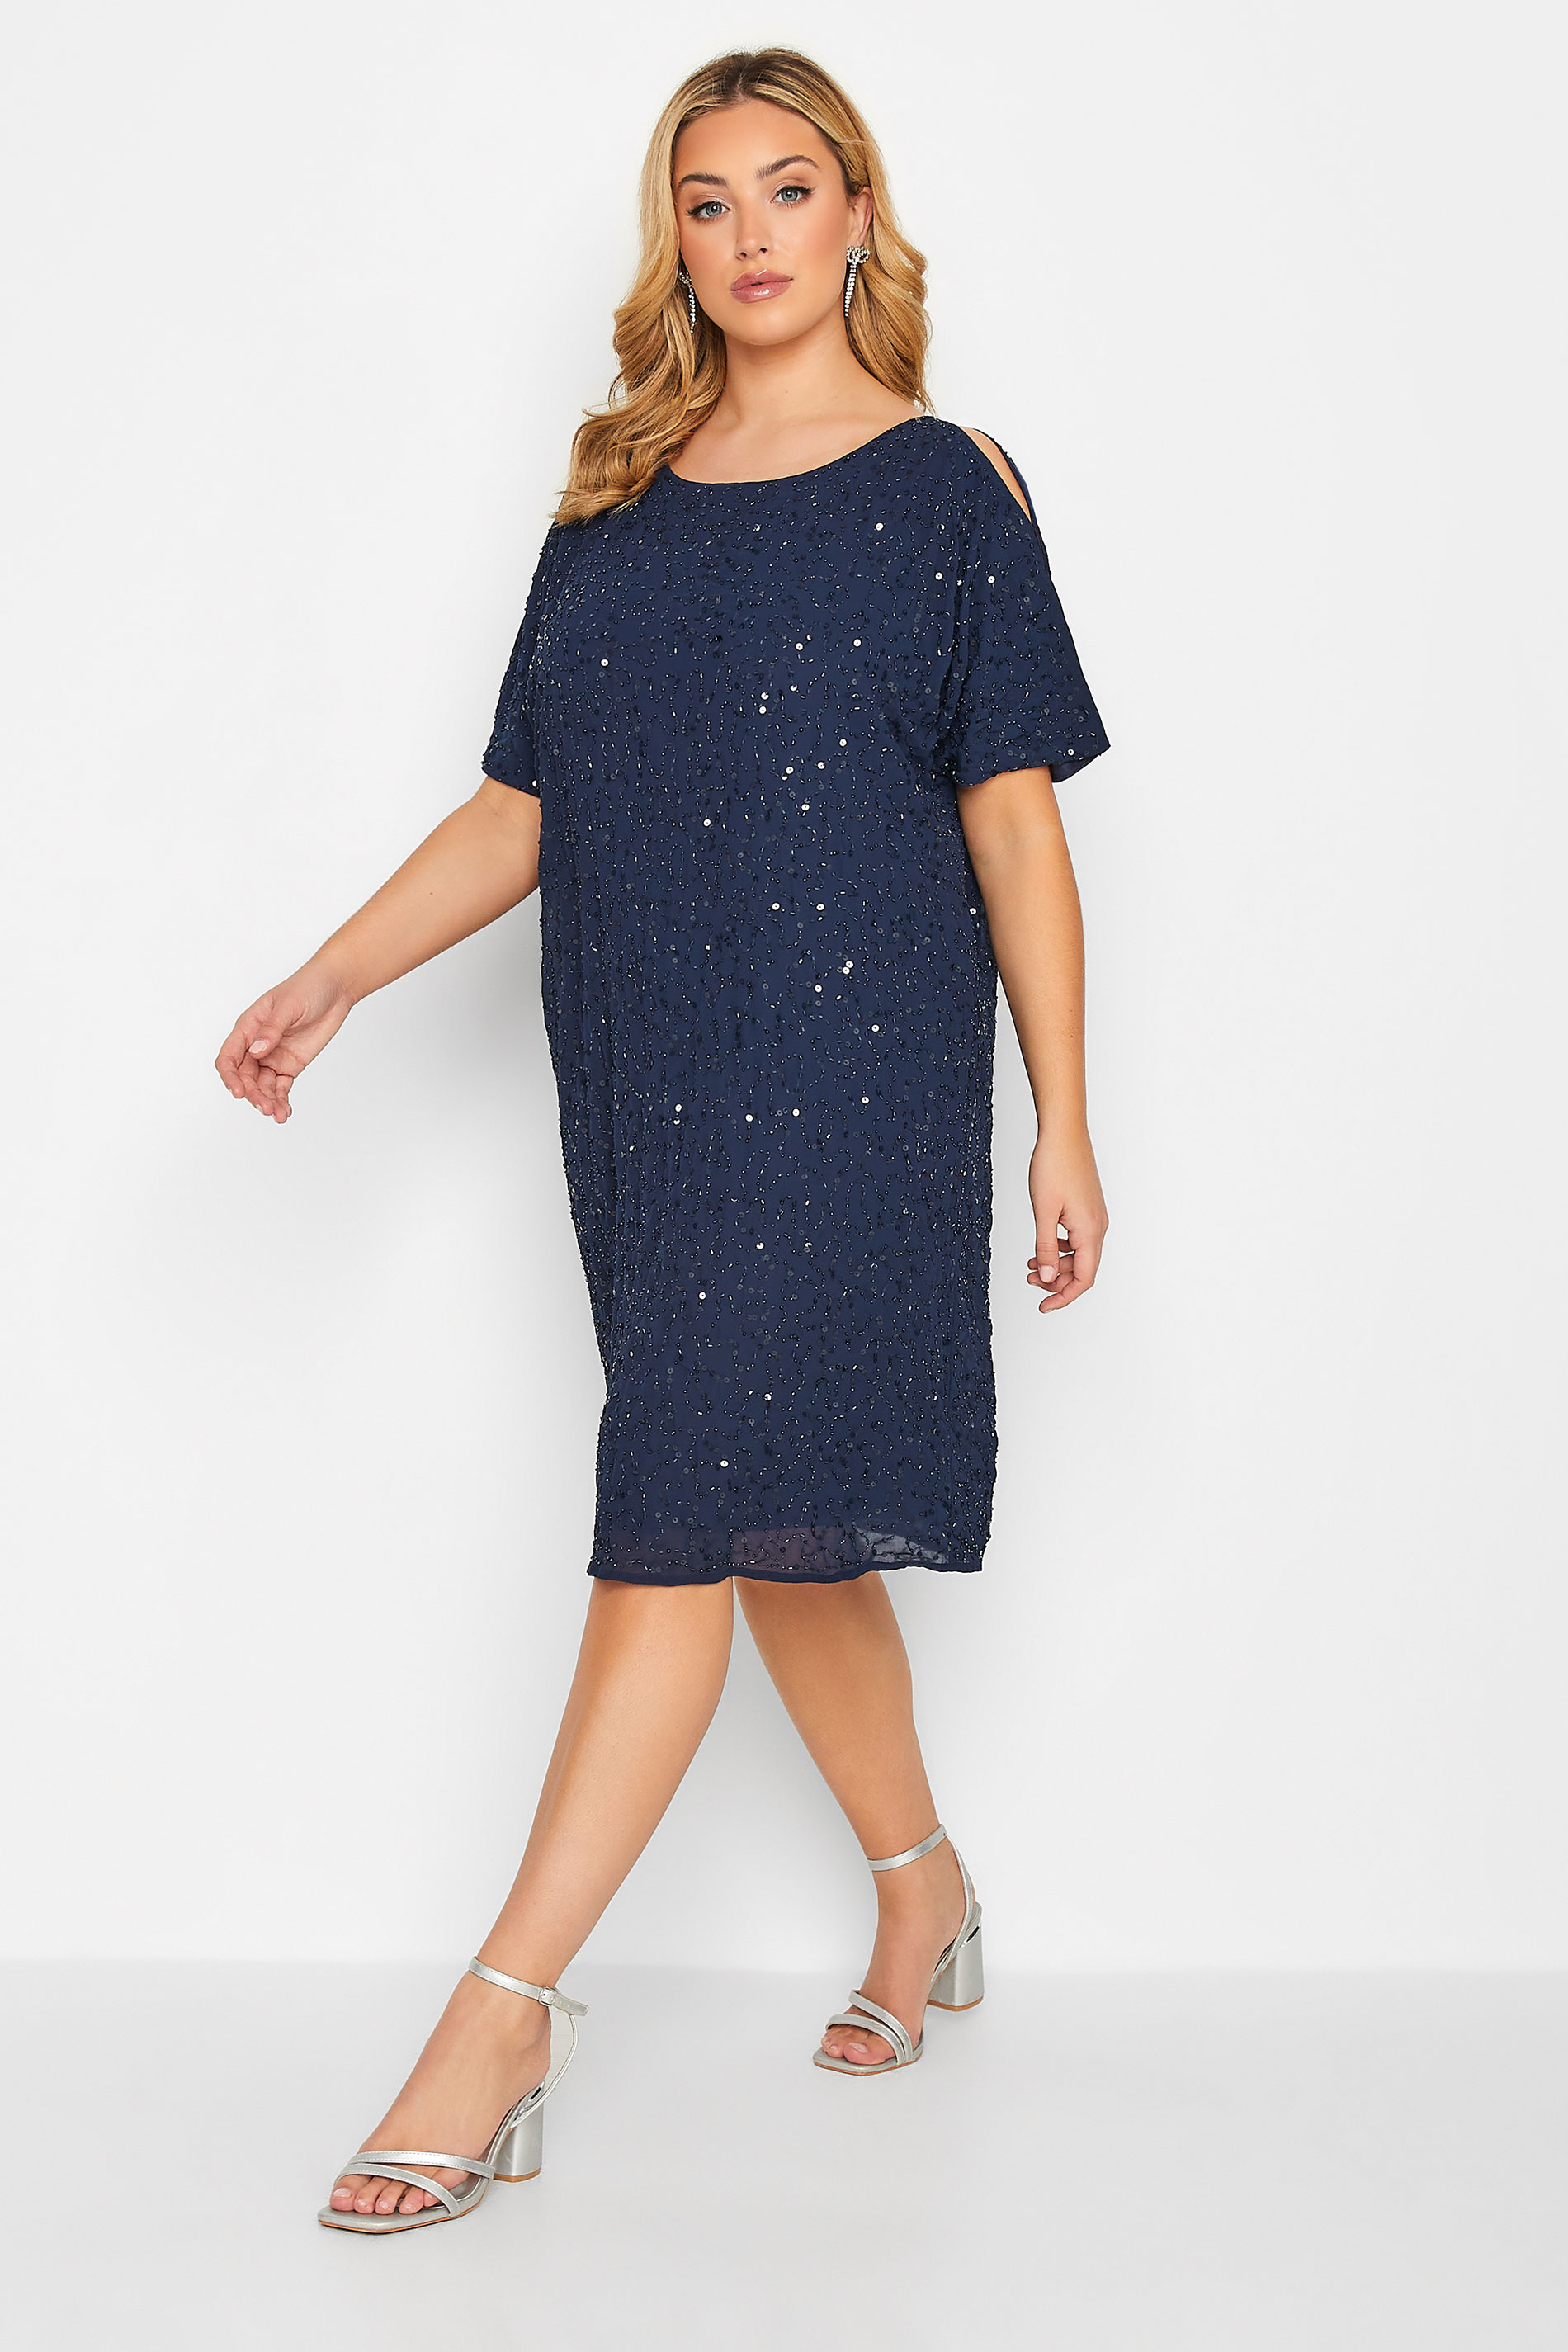 LUXE Plus Size Blue Sequin Hand Embellished Cape Dress | Yours Clothing 1